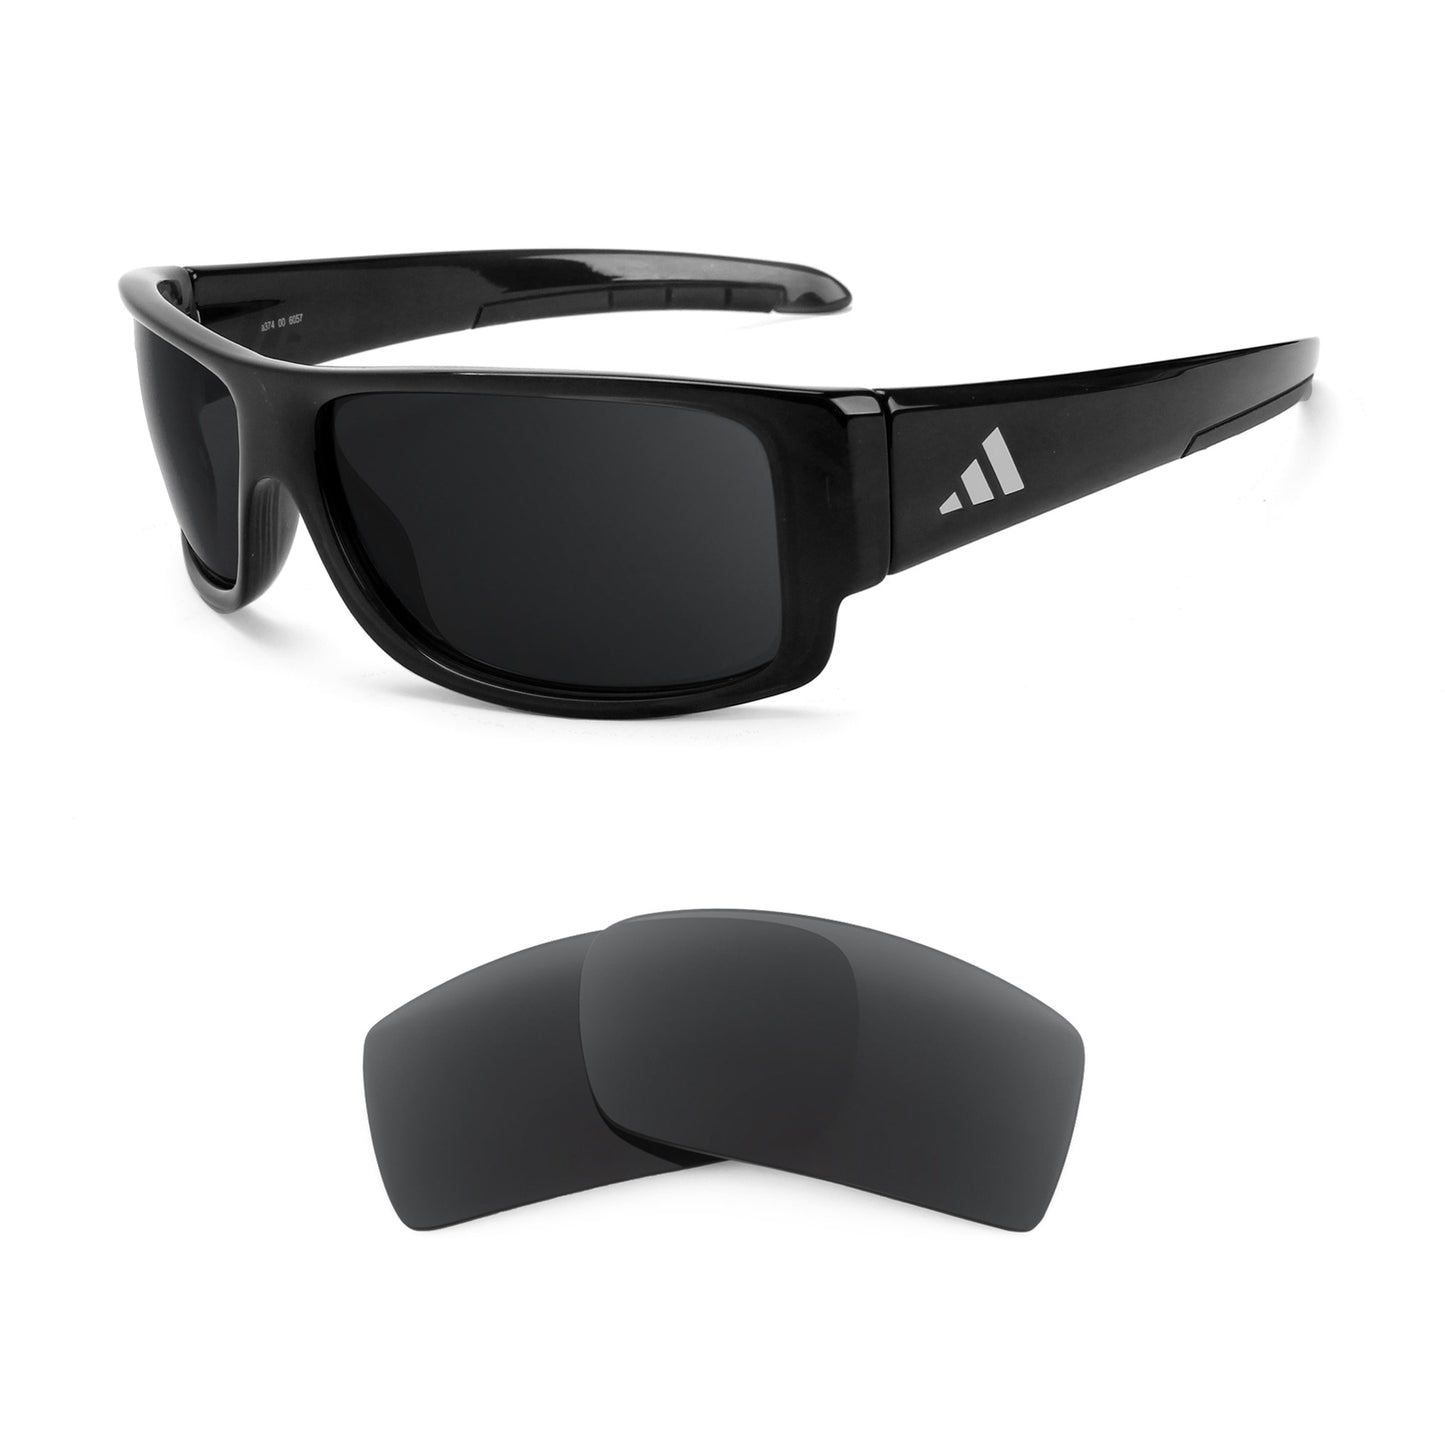 Adidas Kundo A374 sunglasses with replacement lenses